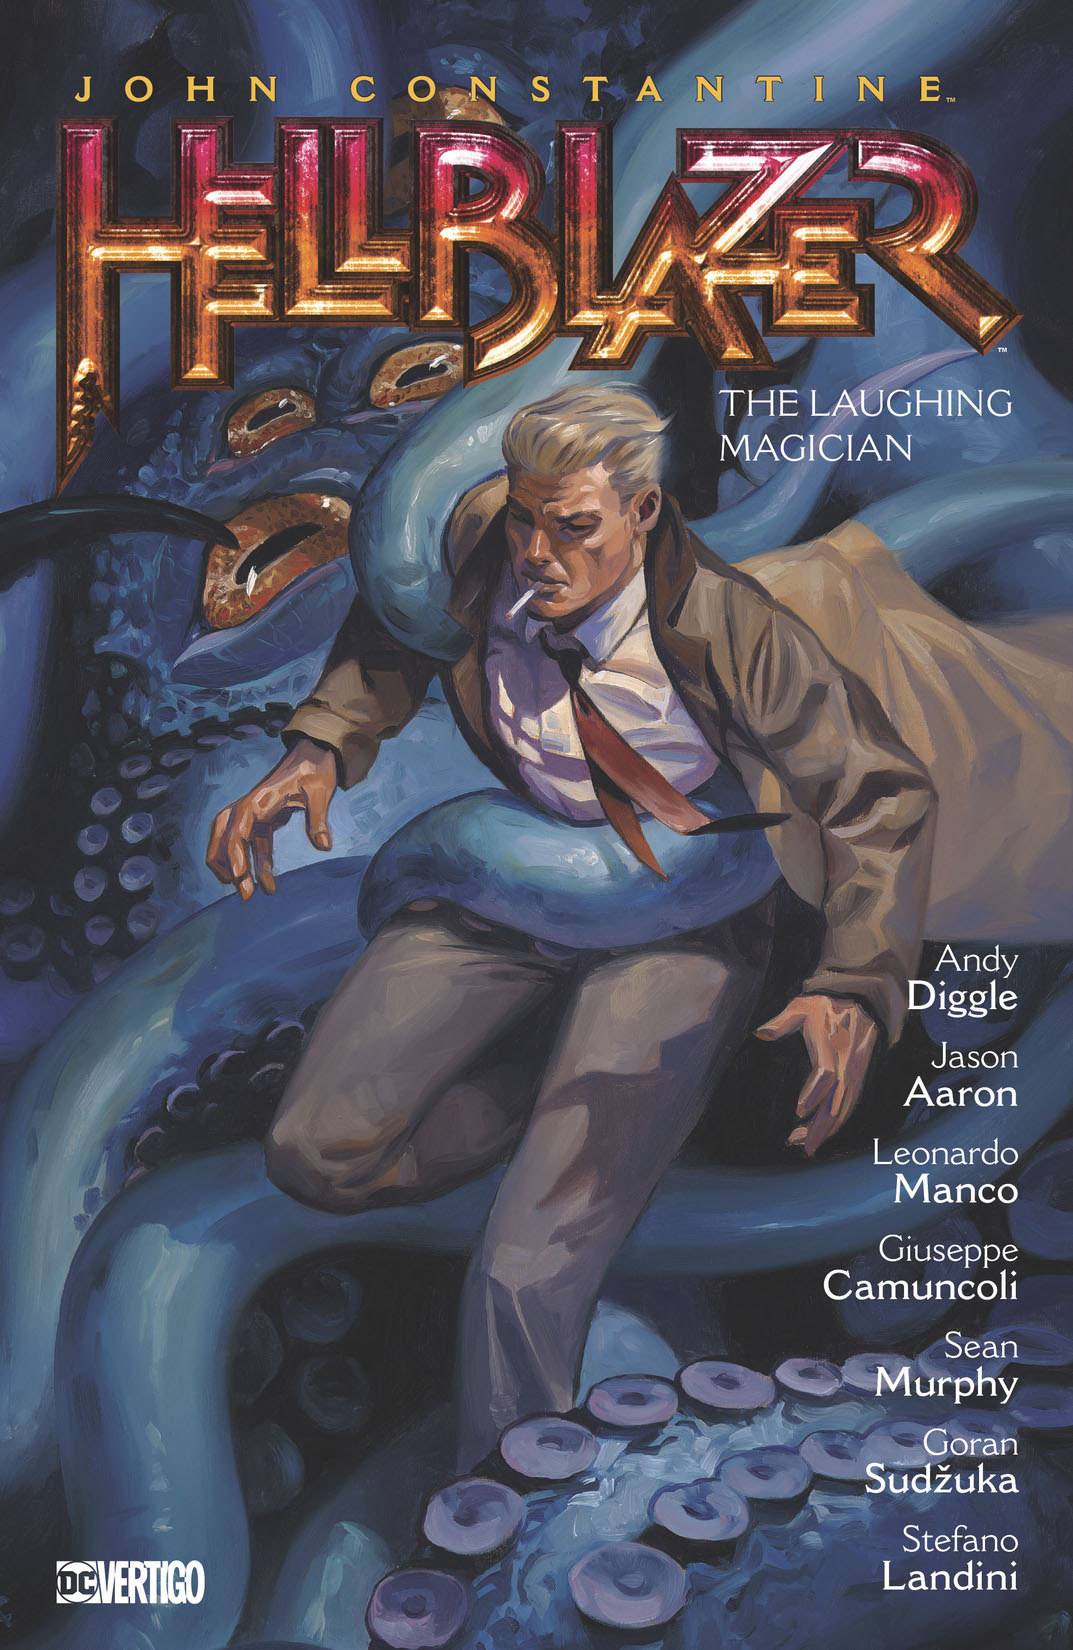 John Constantine: Hellblazer Vol. 21: The Laughing Magician preview images